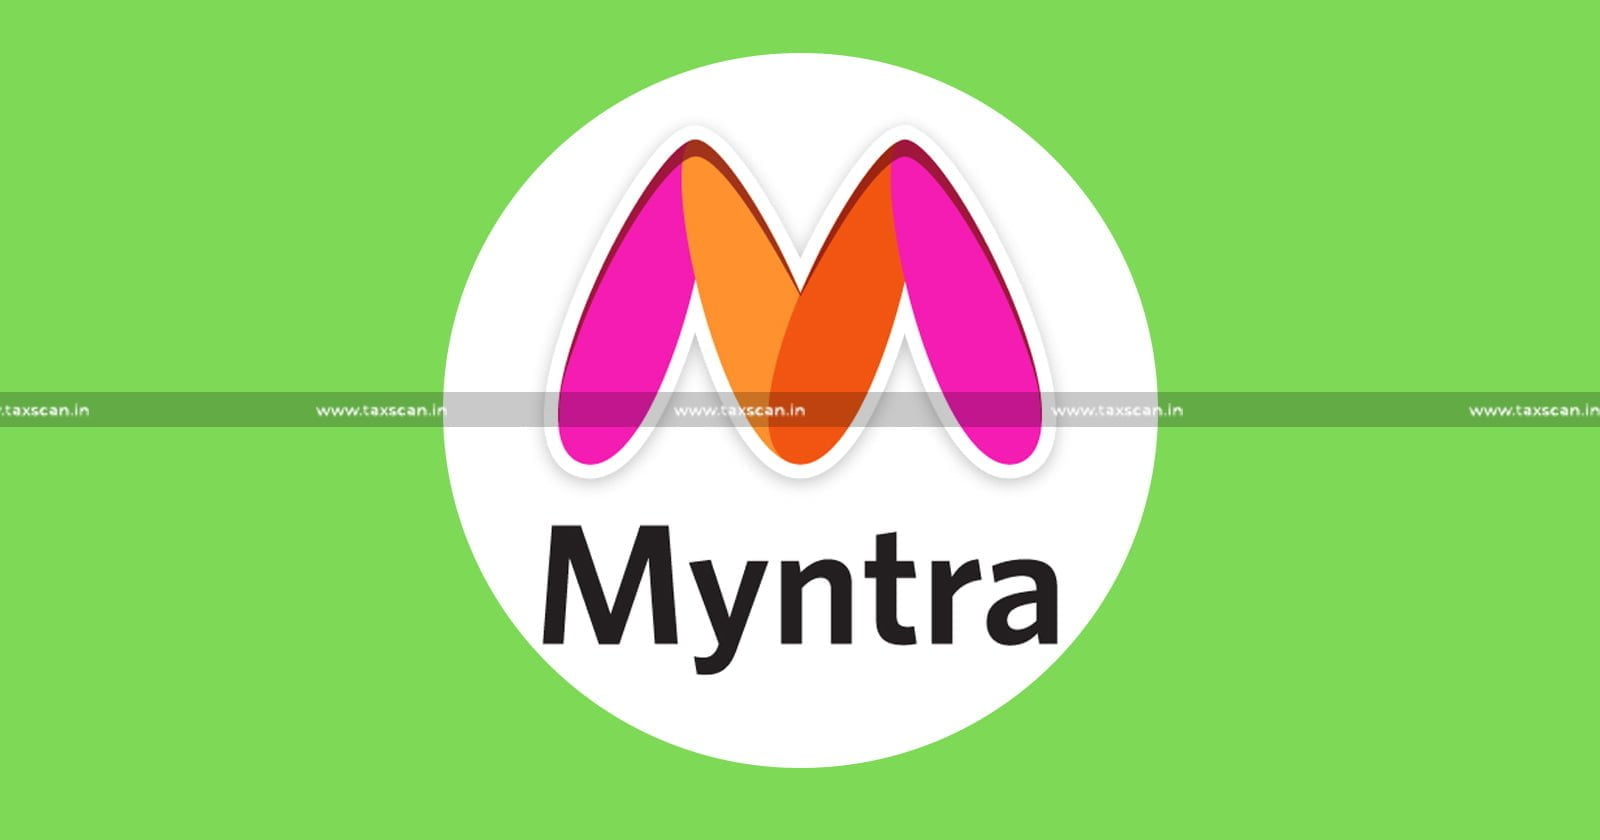 Myntra - ITC - Income tax - Vouchers - Goods - Services - AAAR - Taxscan